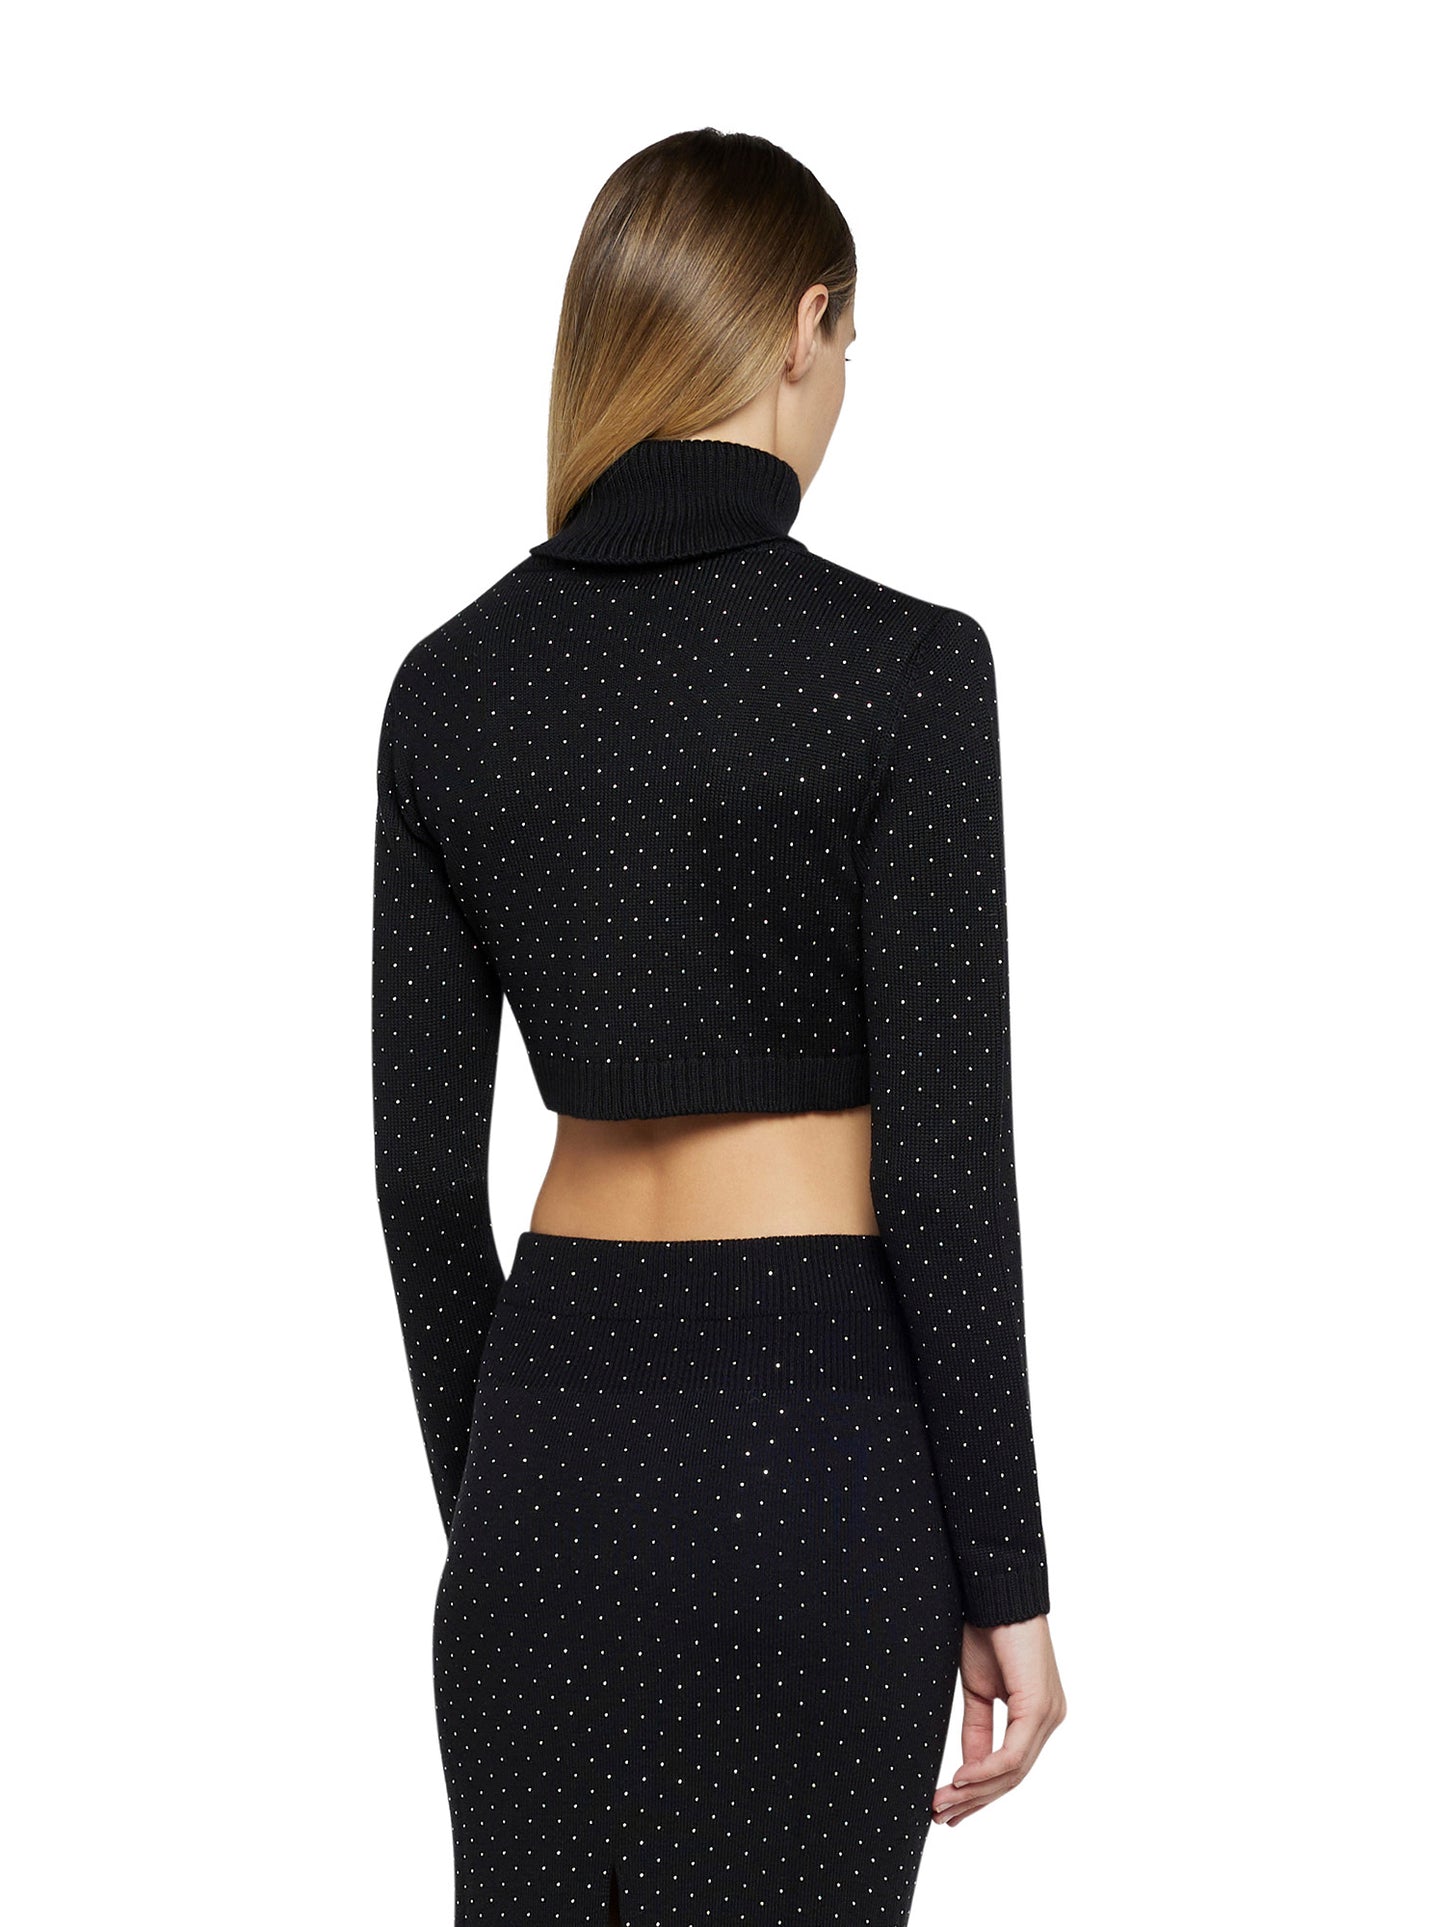 Wool-blend cropped sweater with micro studs